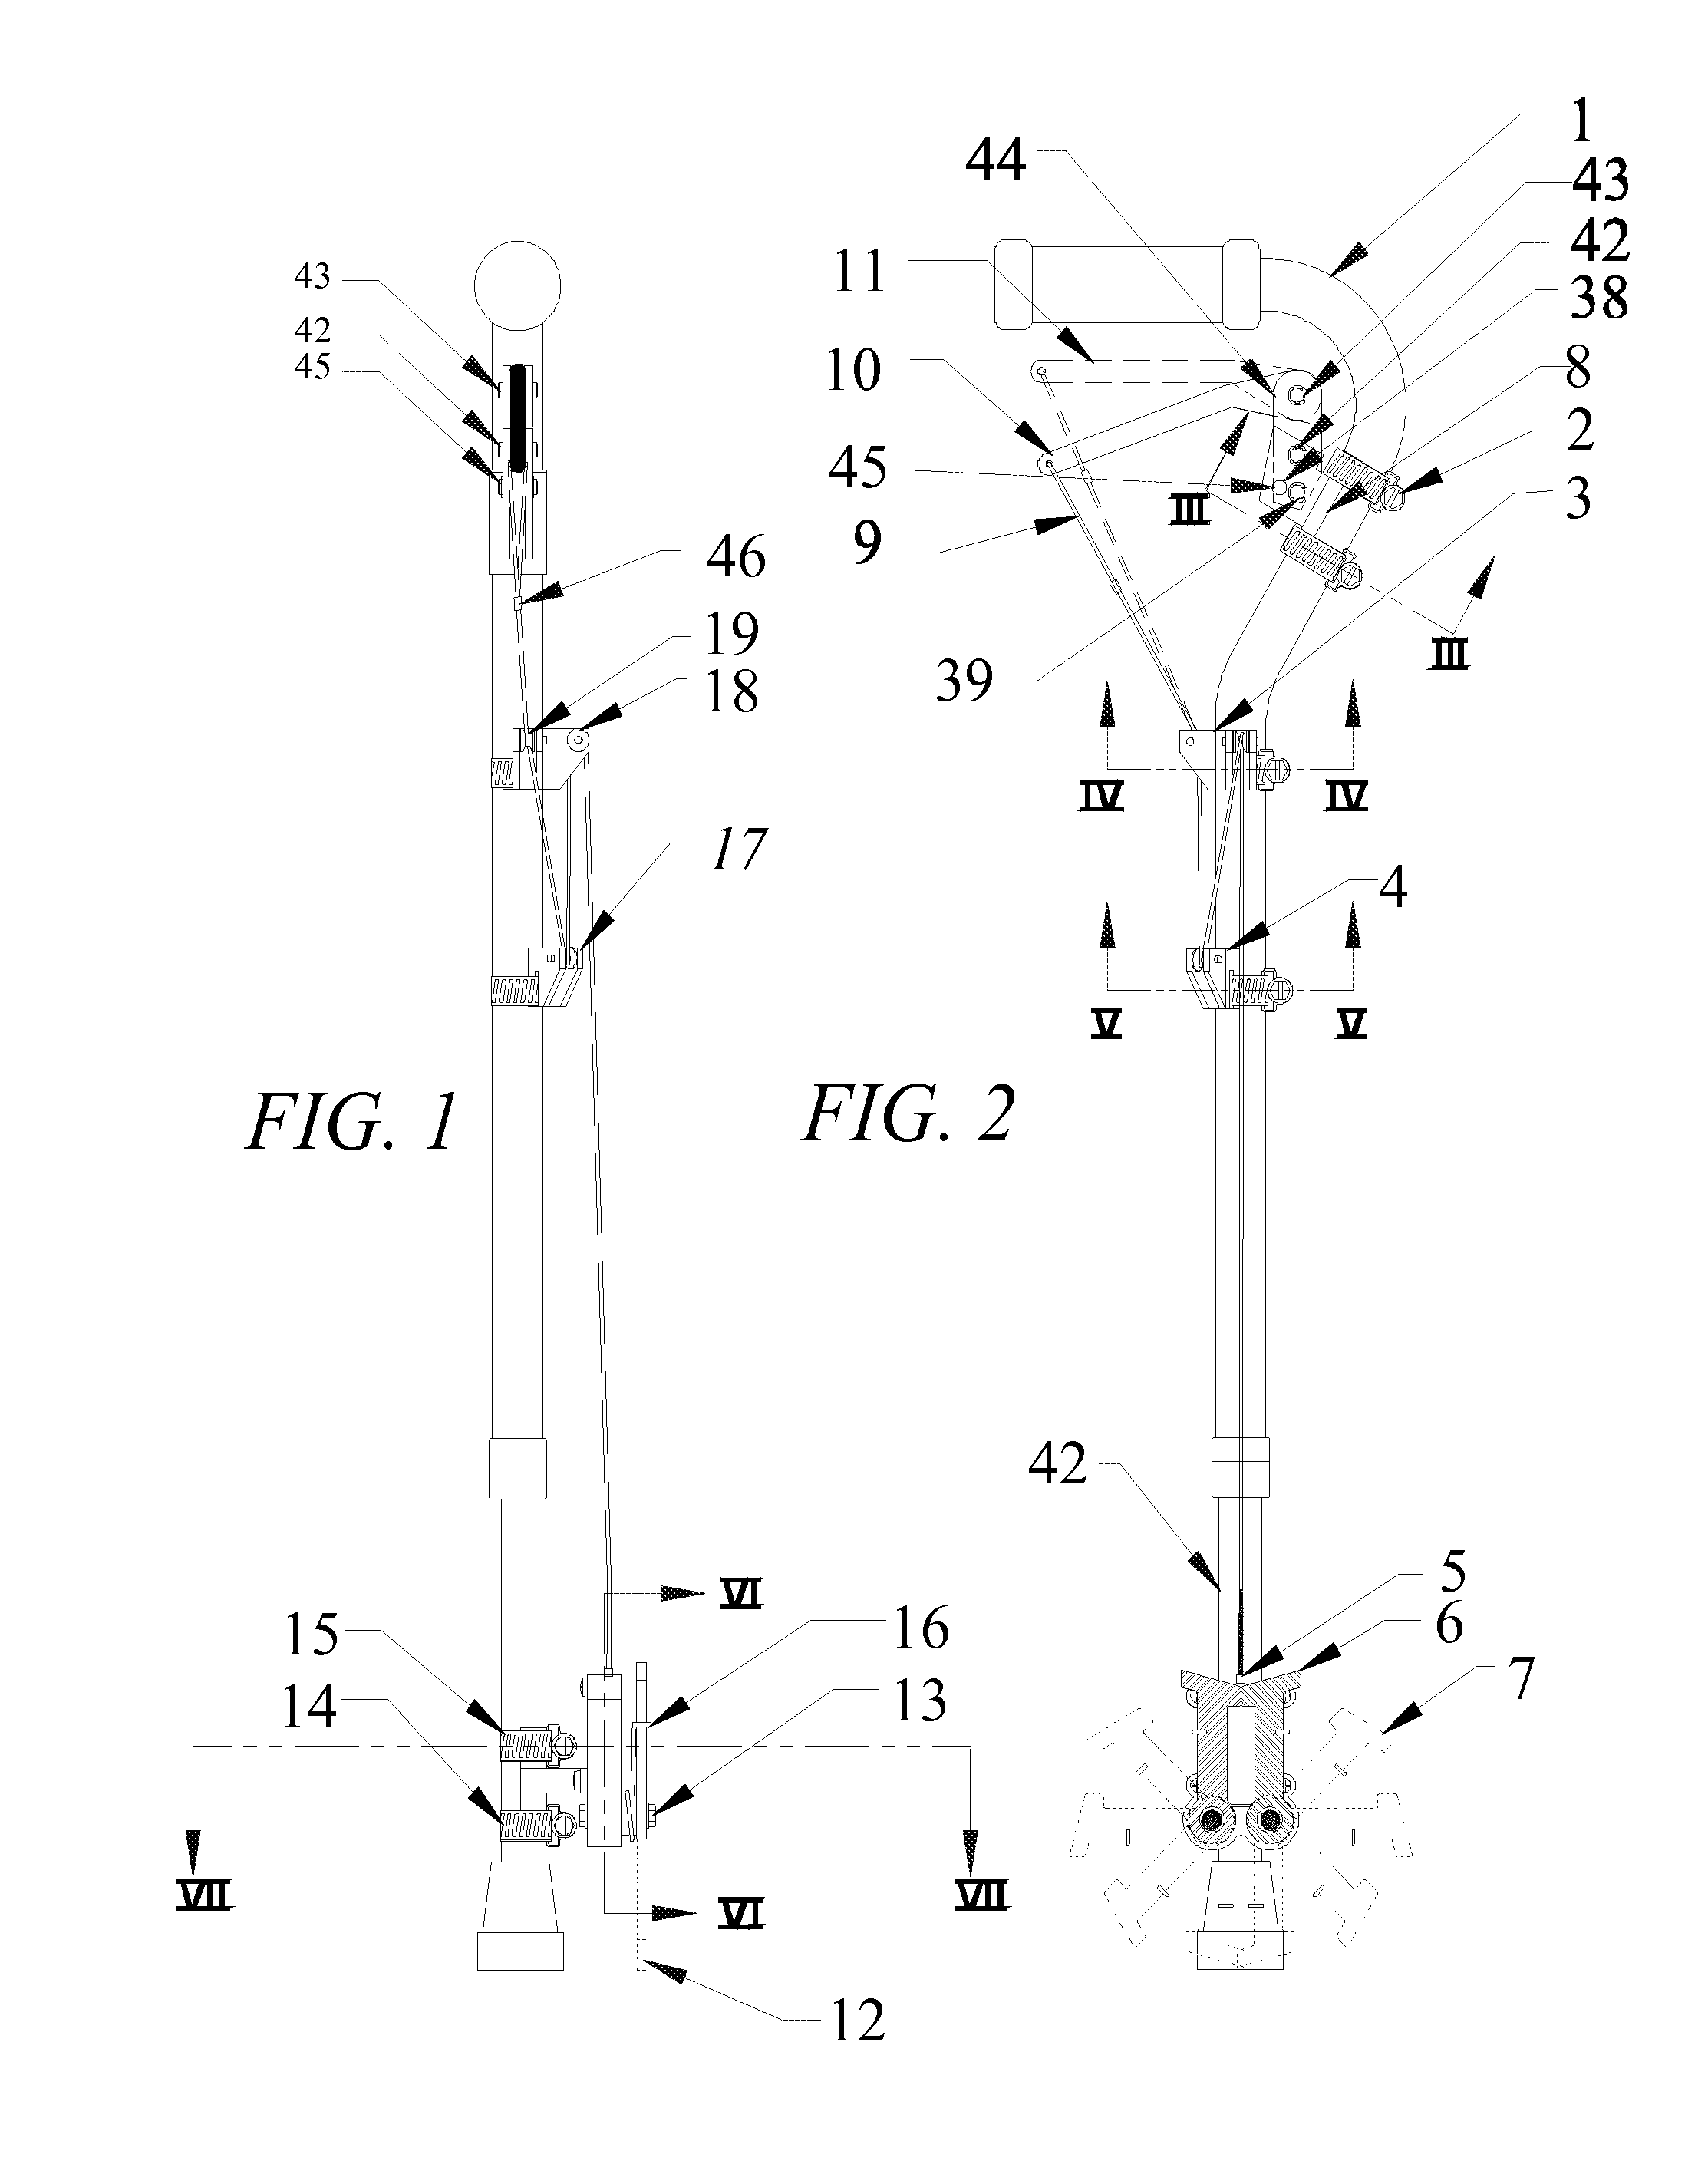 Cane and Crutch grasping device